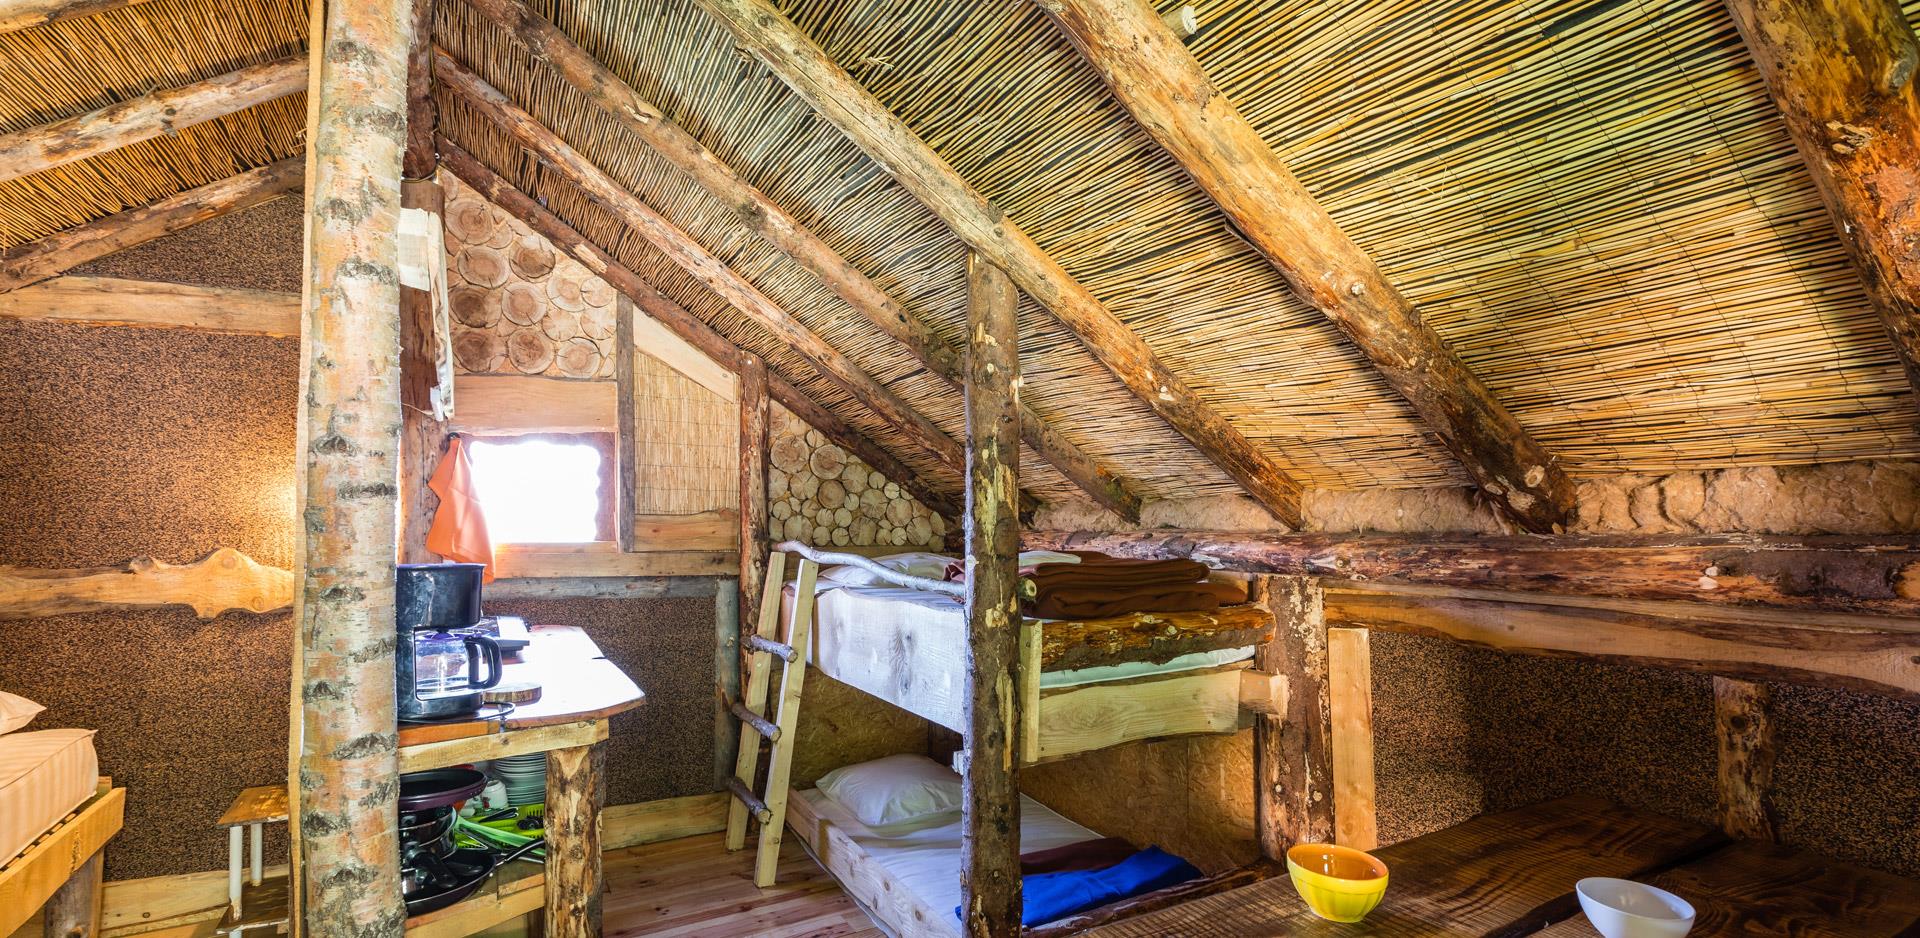 Rental of atypical accommodations in the Haut-Rhin: view of a kitchen area and a bunk beds from a wooden cabin